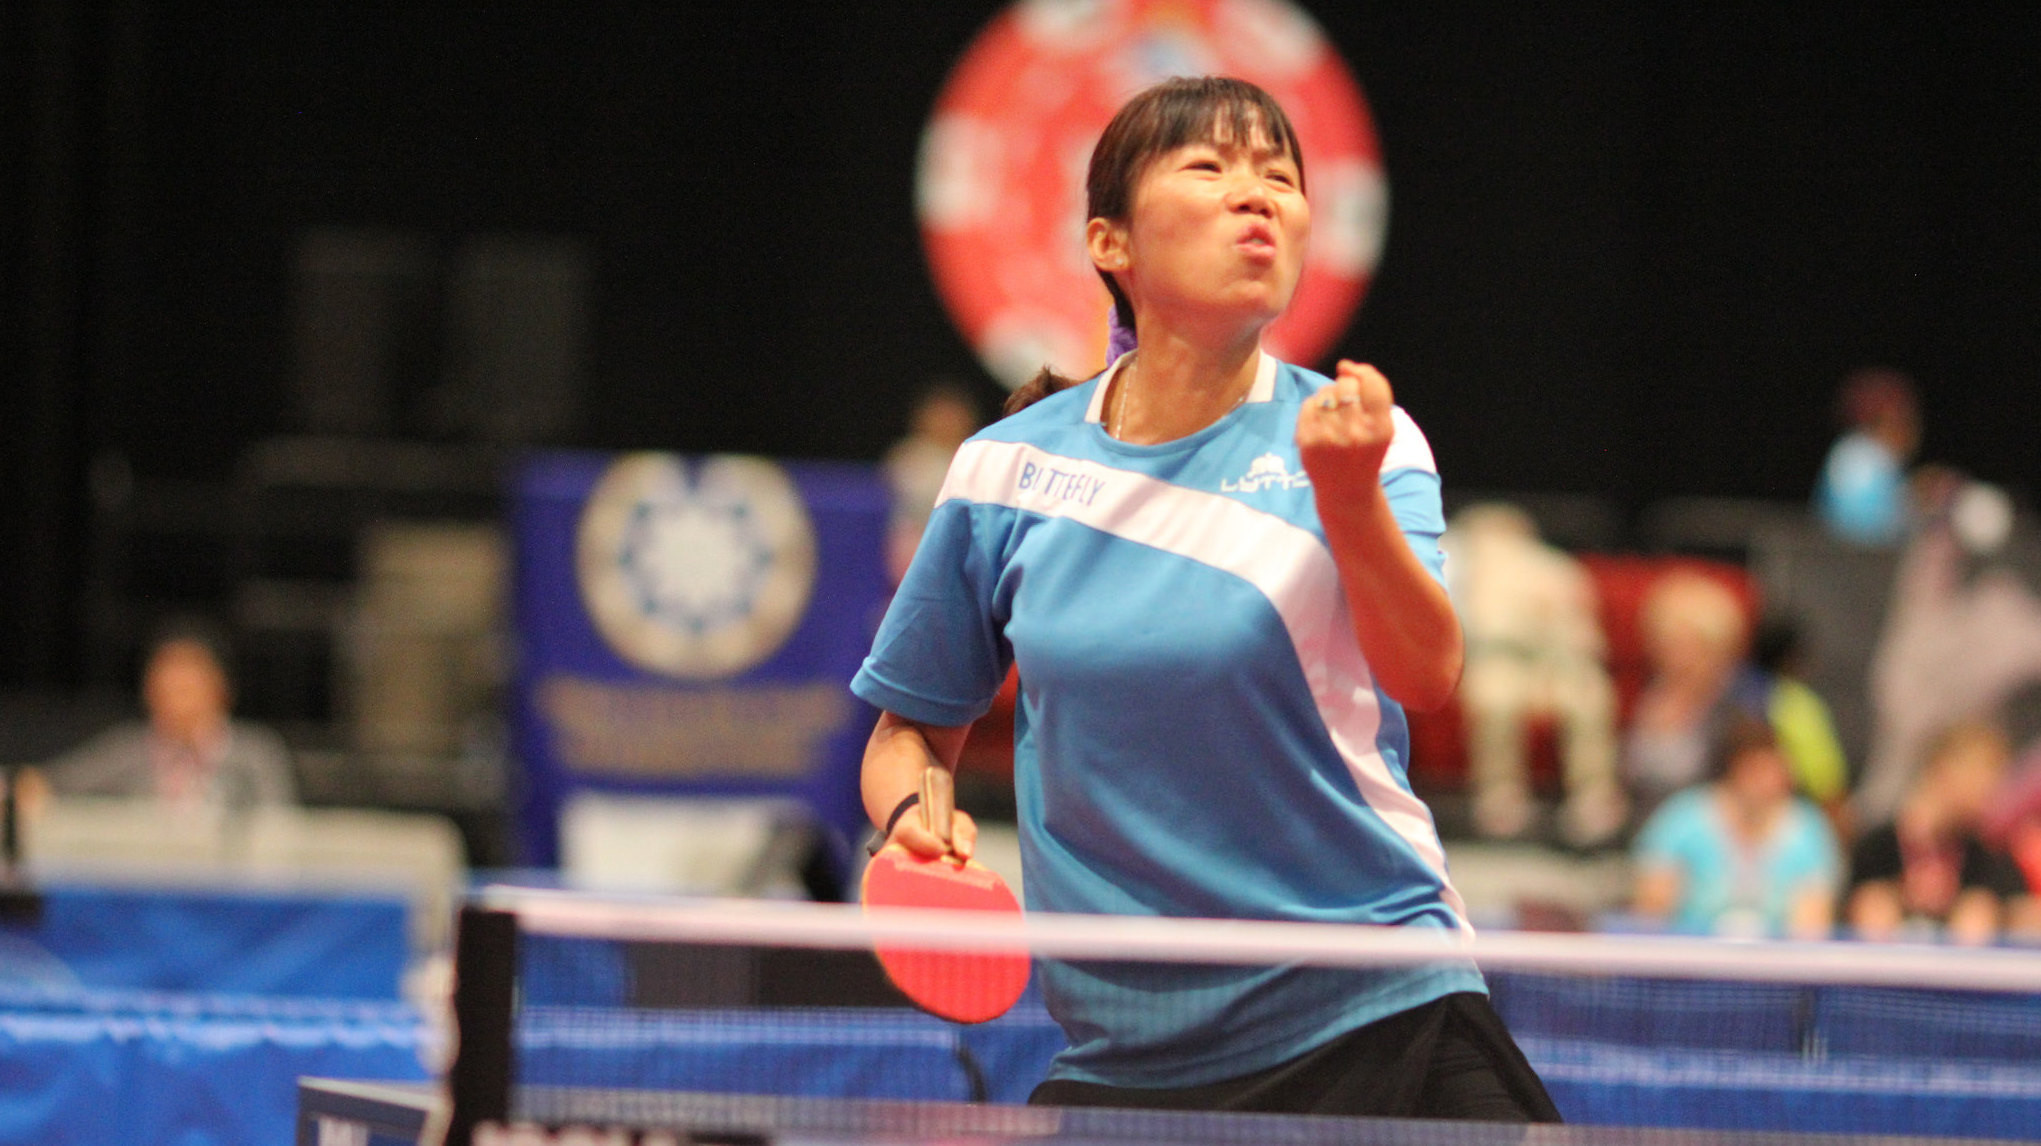 The ITTF has named six cities set to host events on the new World Veterans Tour ©ITTF